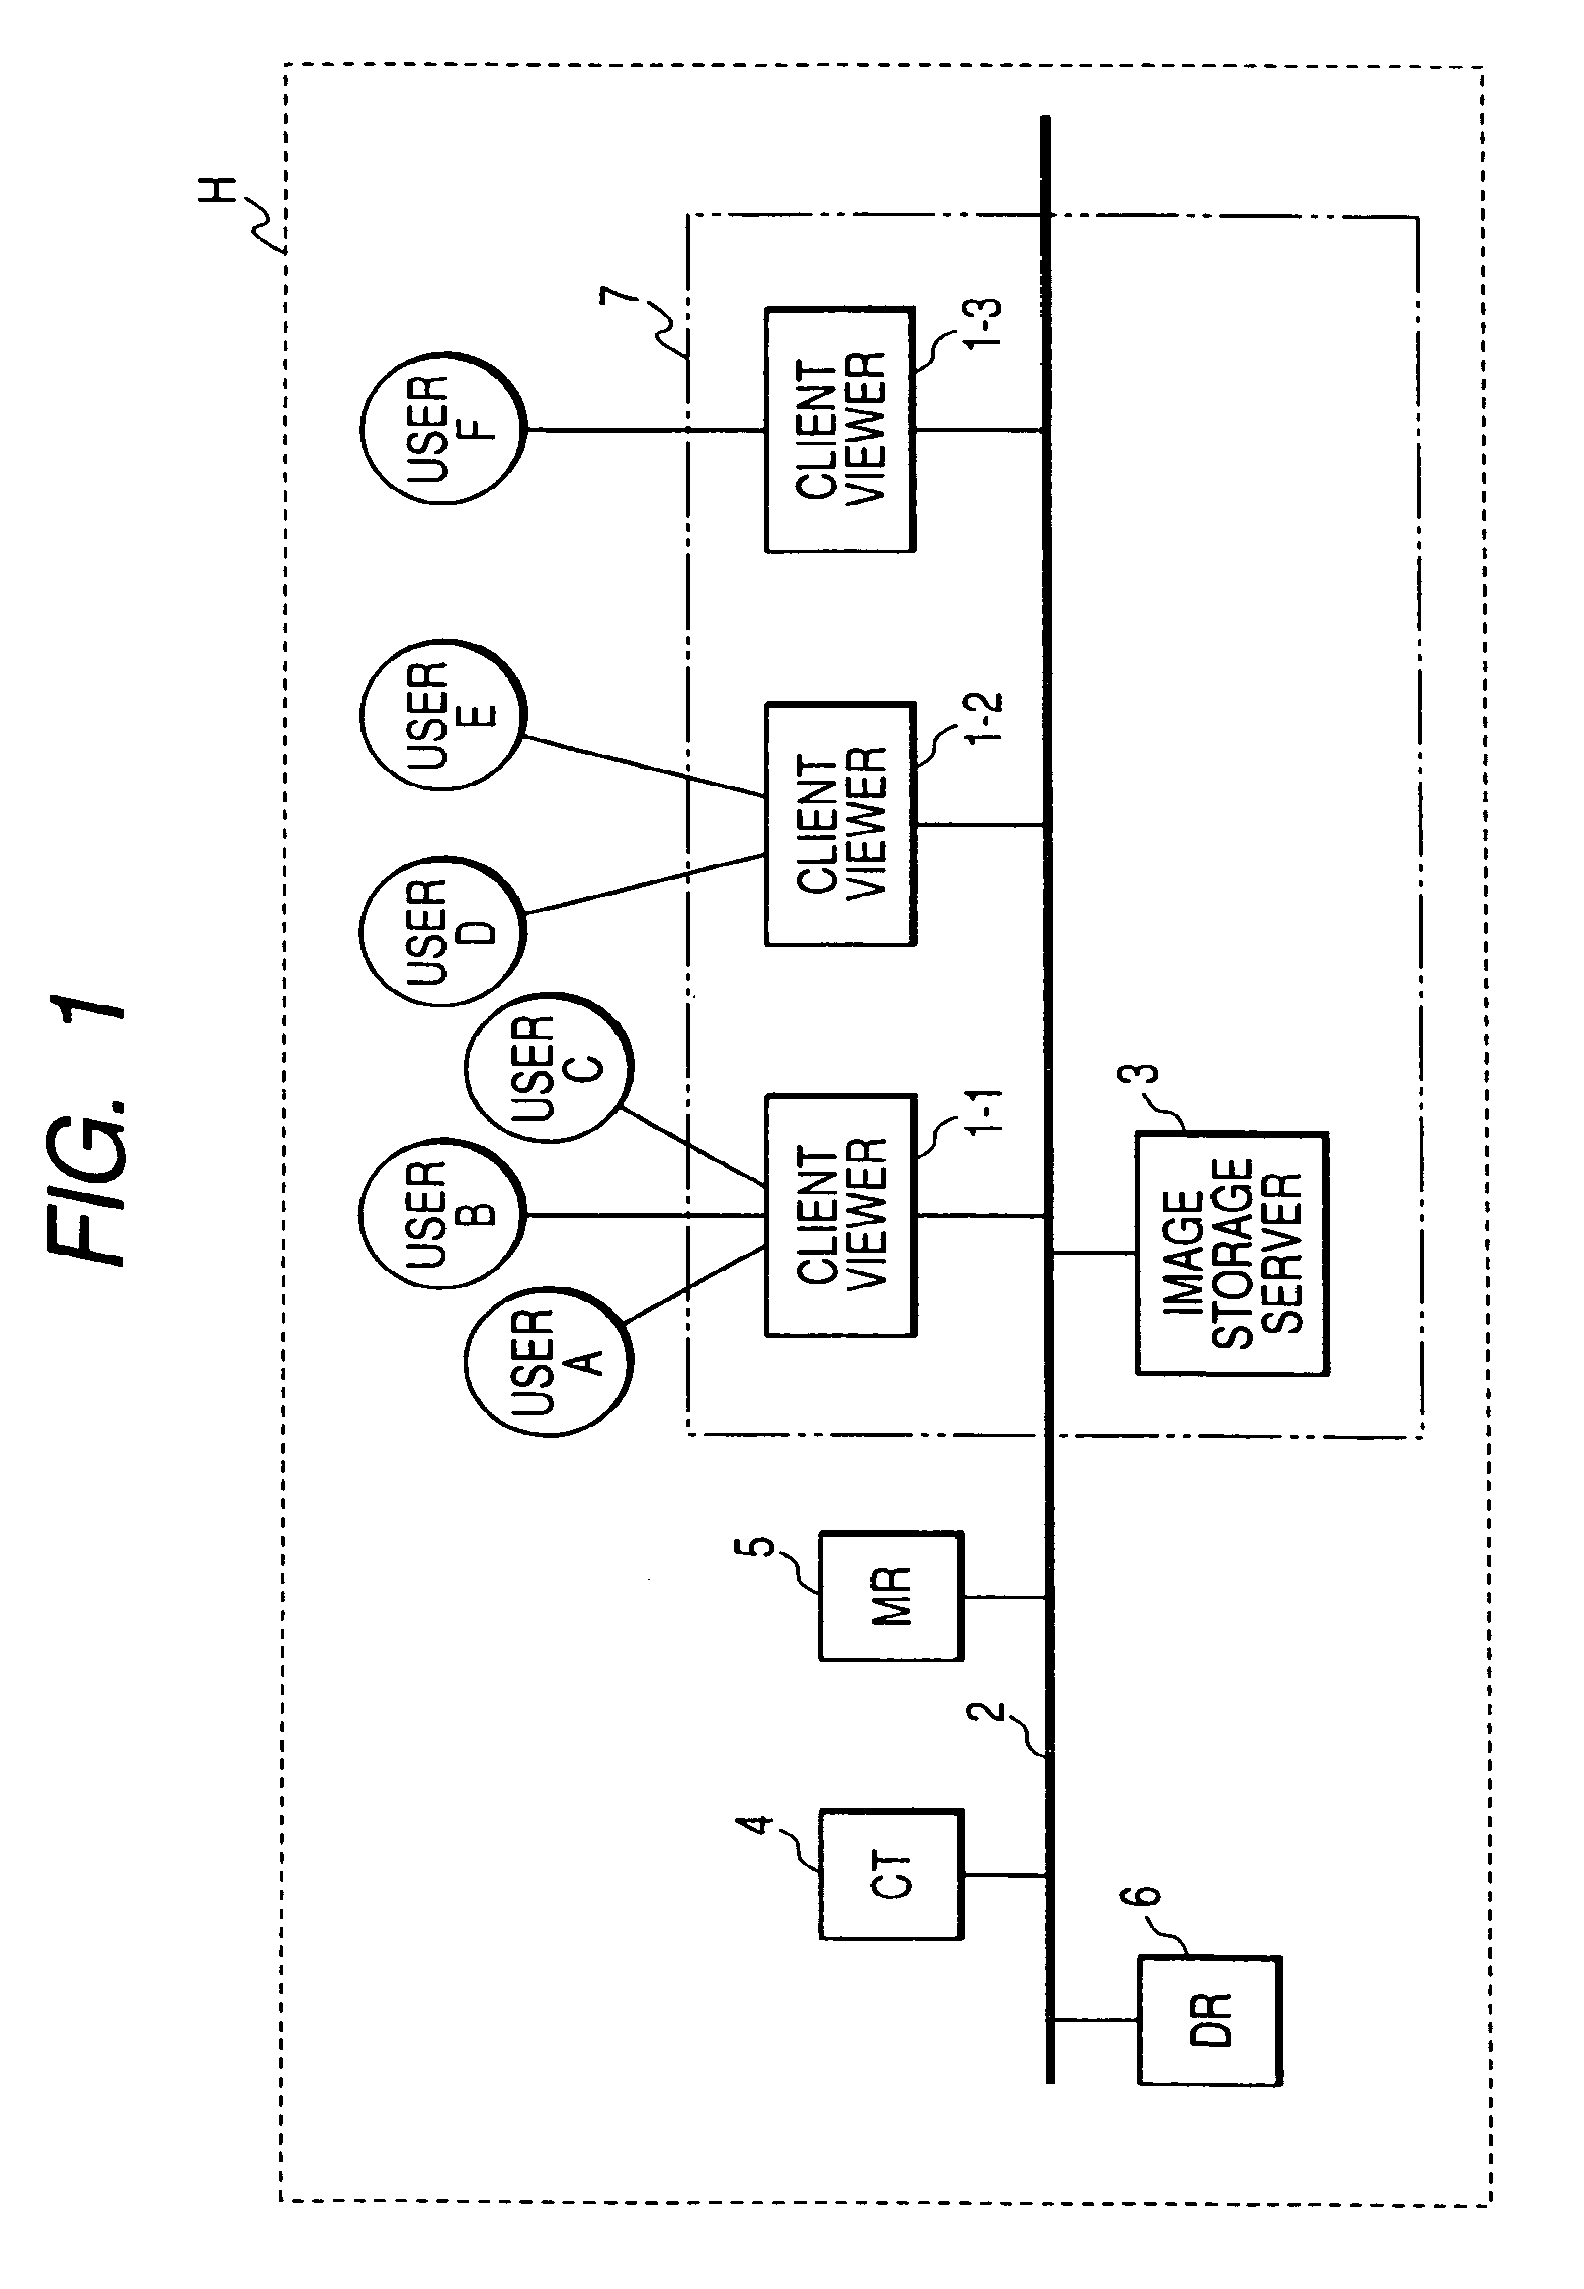 Image storage and display system, maintenance system therefor, and image storage and display method